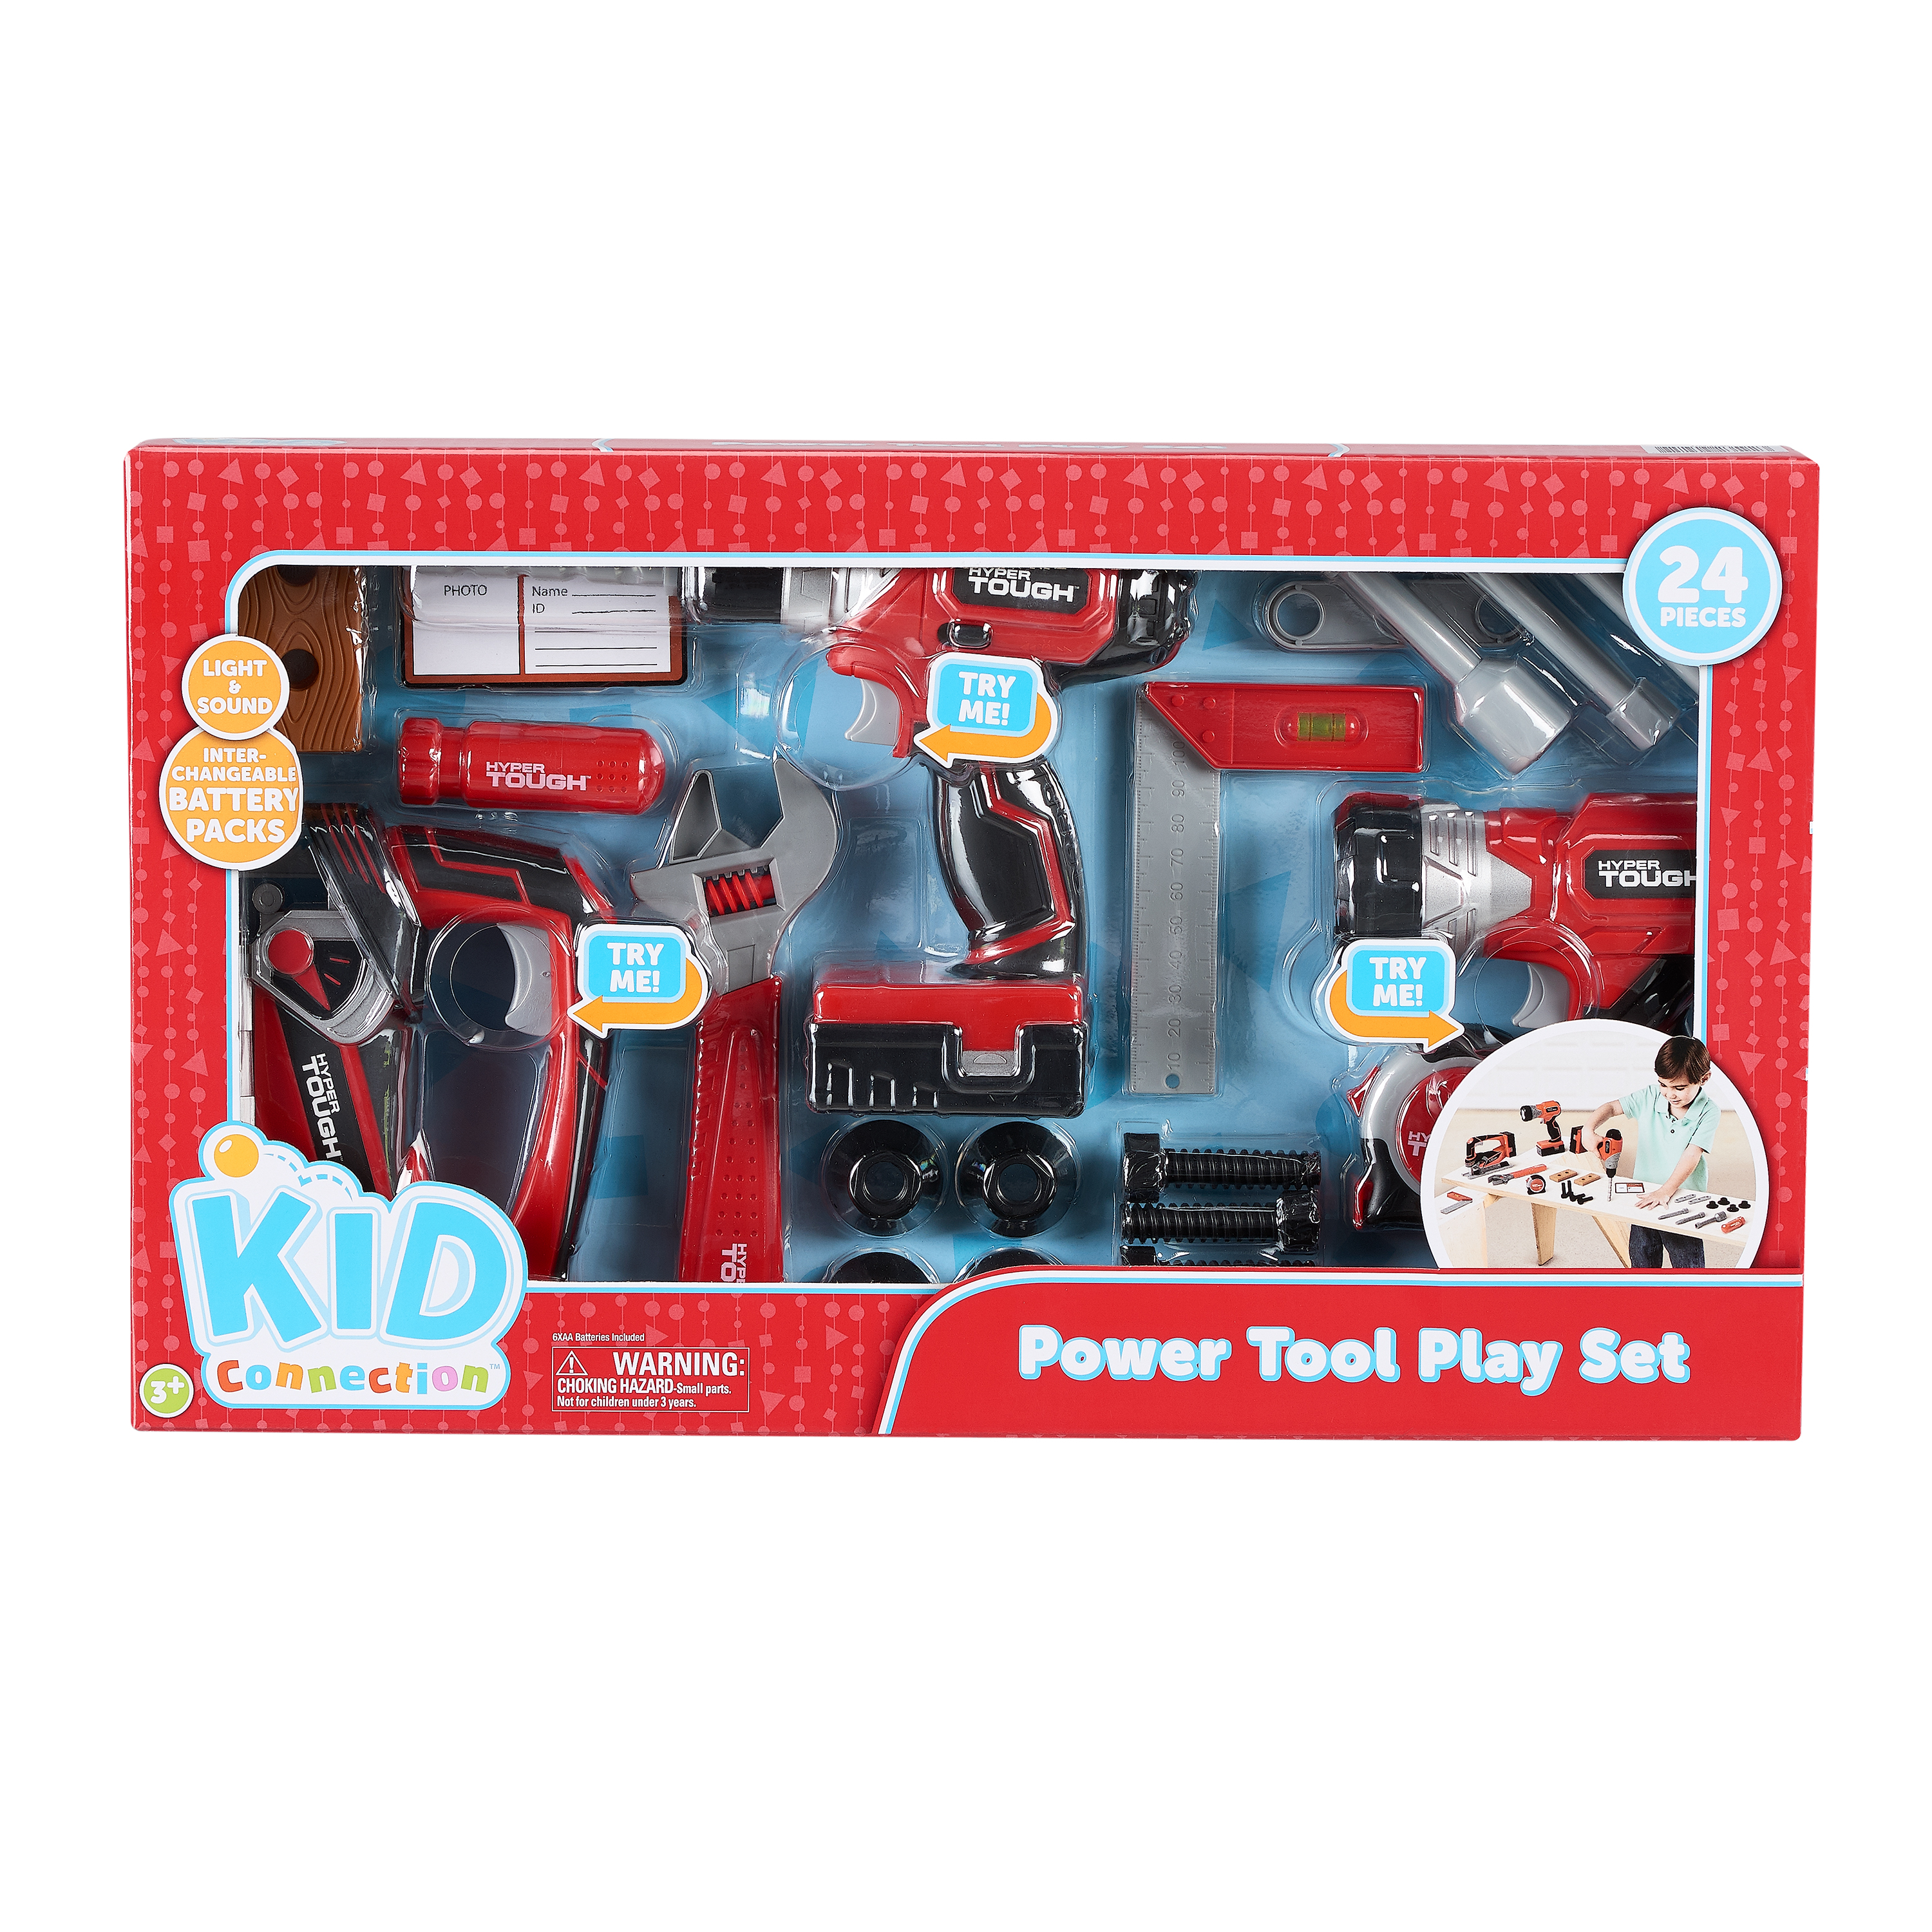 Kid Connection Power Tool Play Set, 24 Pieces - image 2 of 10